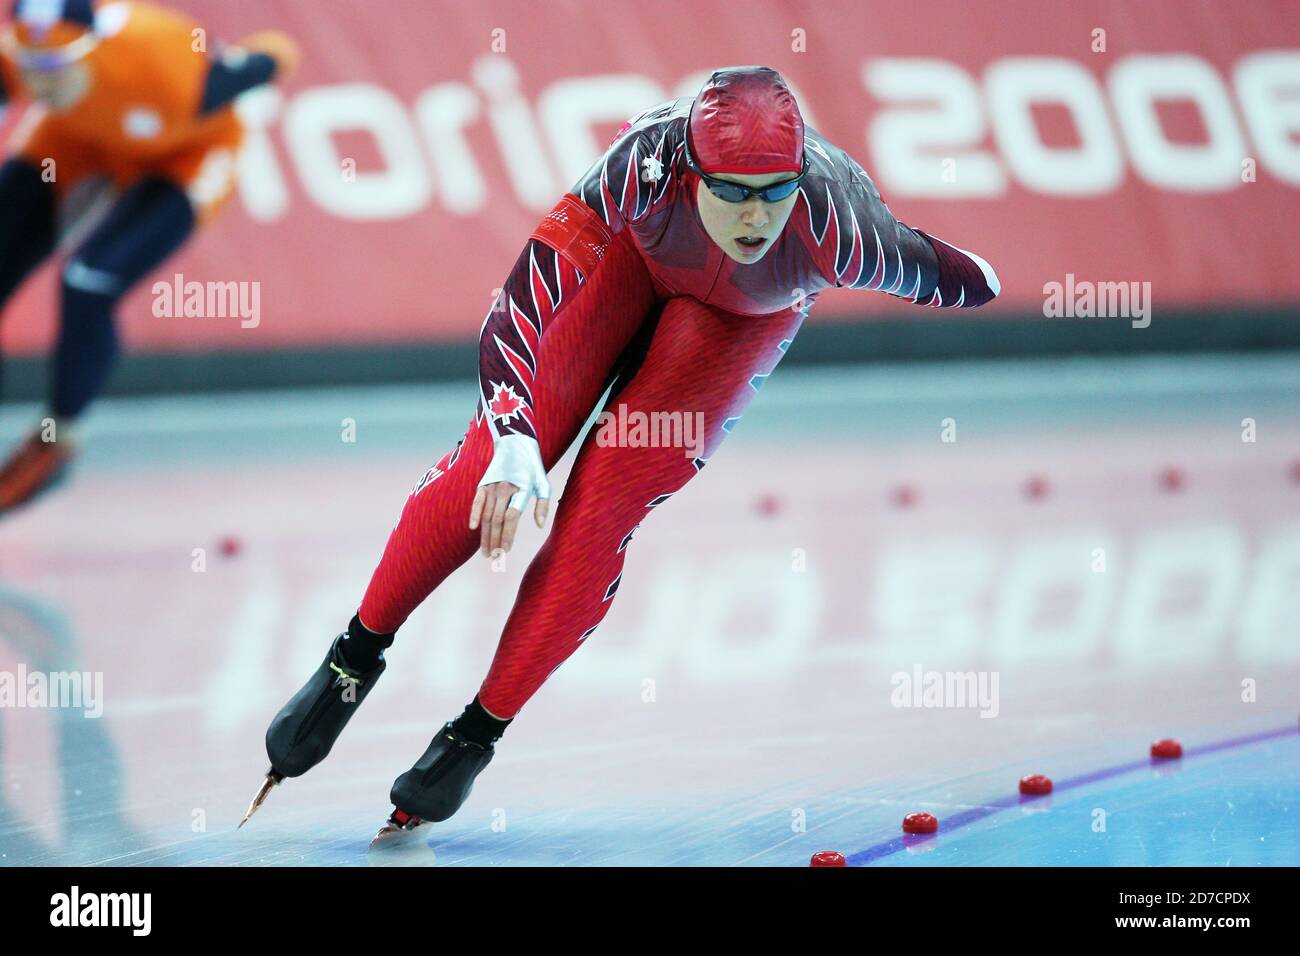 Turin, Italy. 12th Feb, 2006. Cindy Klassen (CAN) Speed Skating : Women's 3000m at Oval Lingotto during the Torino 2006 Winter Olympic Games in Turin, Italy . Credit: Koji Aoki/AFLO SPORT/Alamy Live News Stock Photo